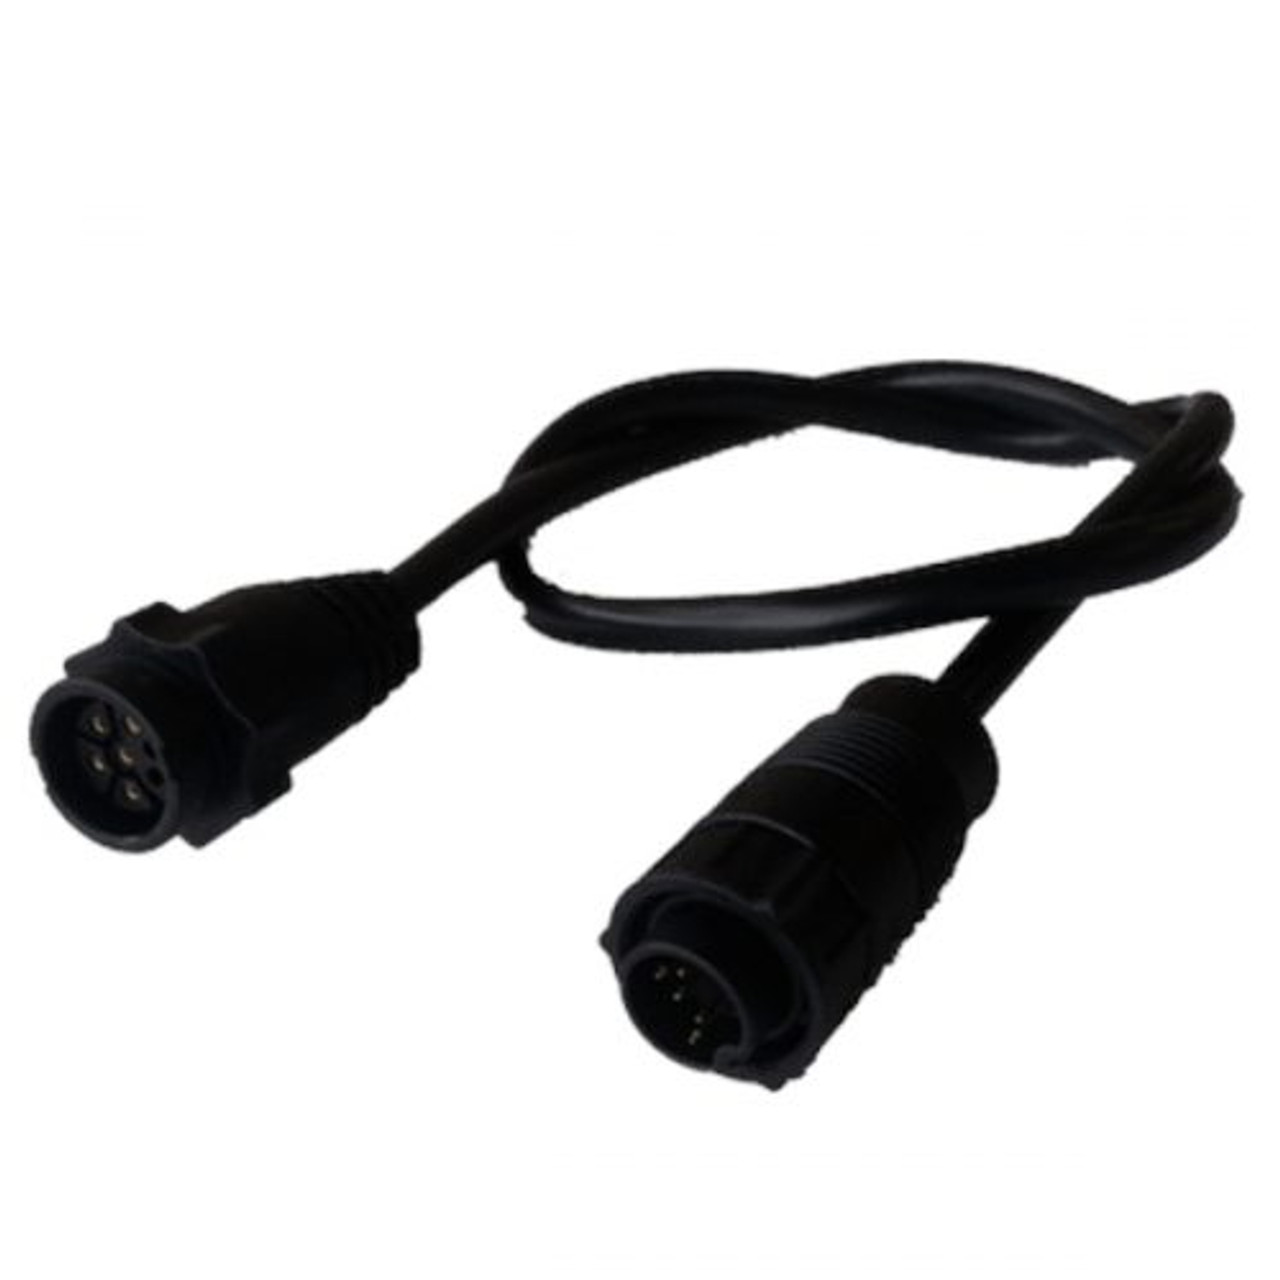 Lowrance 9-Pin to 7-Pin XSONIC Transducer Adapter Cable - The